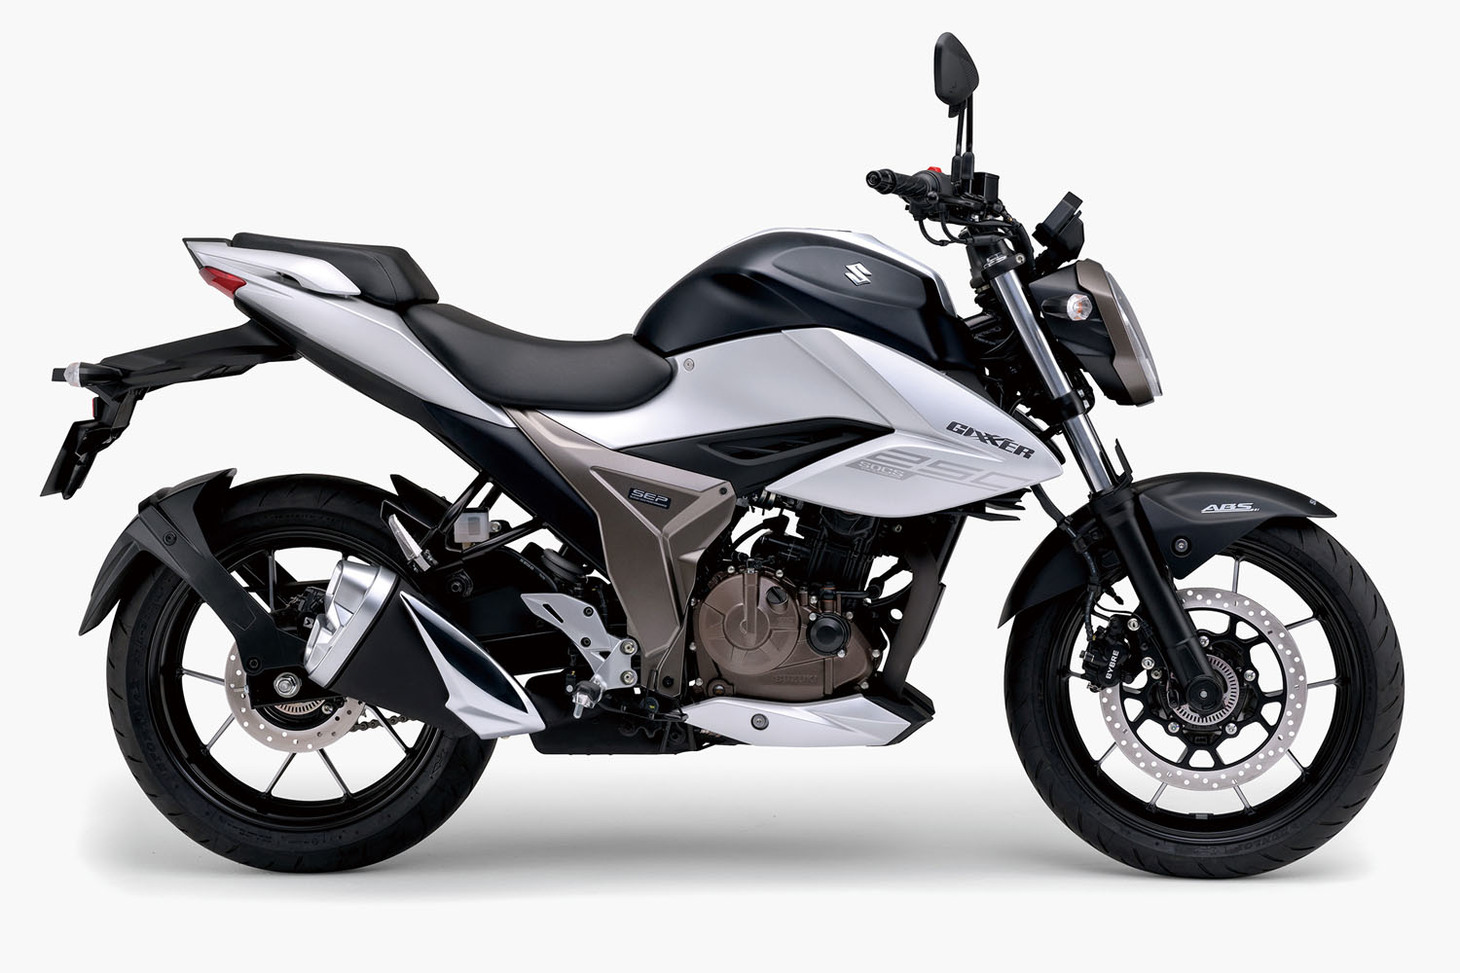 India made Suzuki Gixxer  250 launched in Japan priced at 